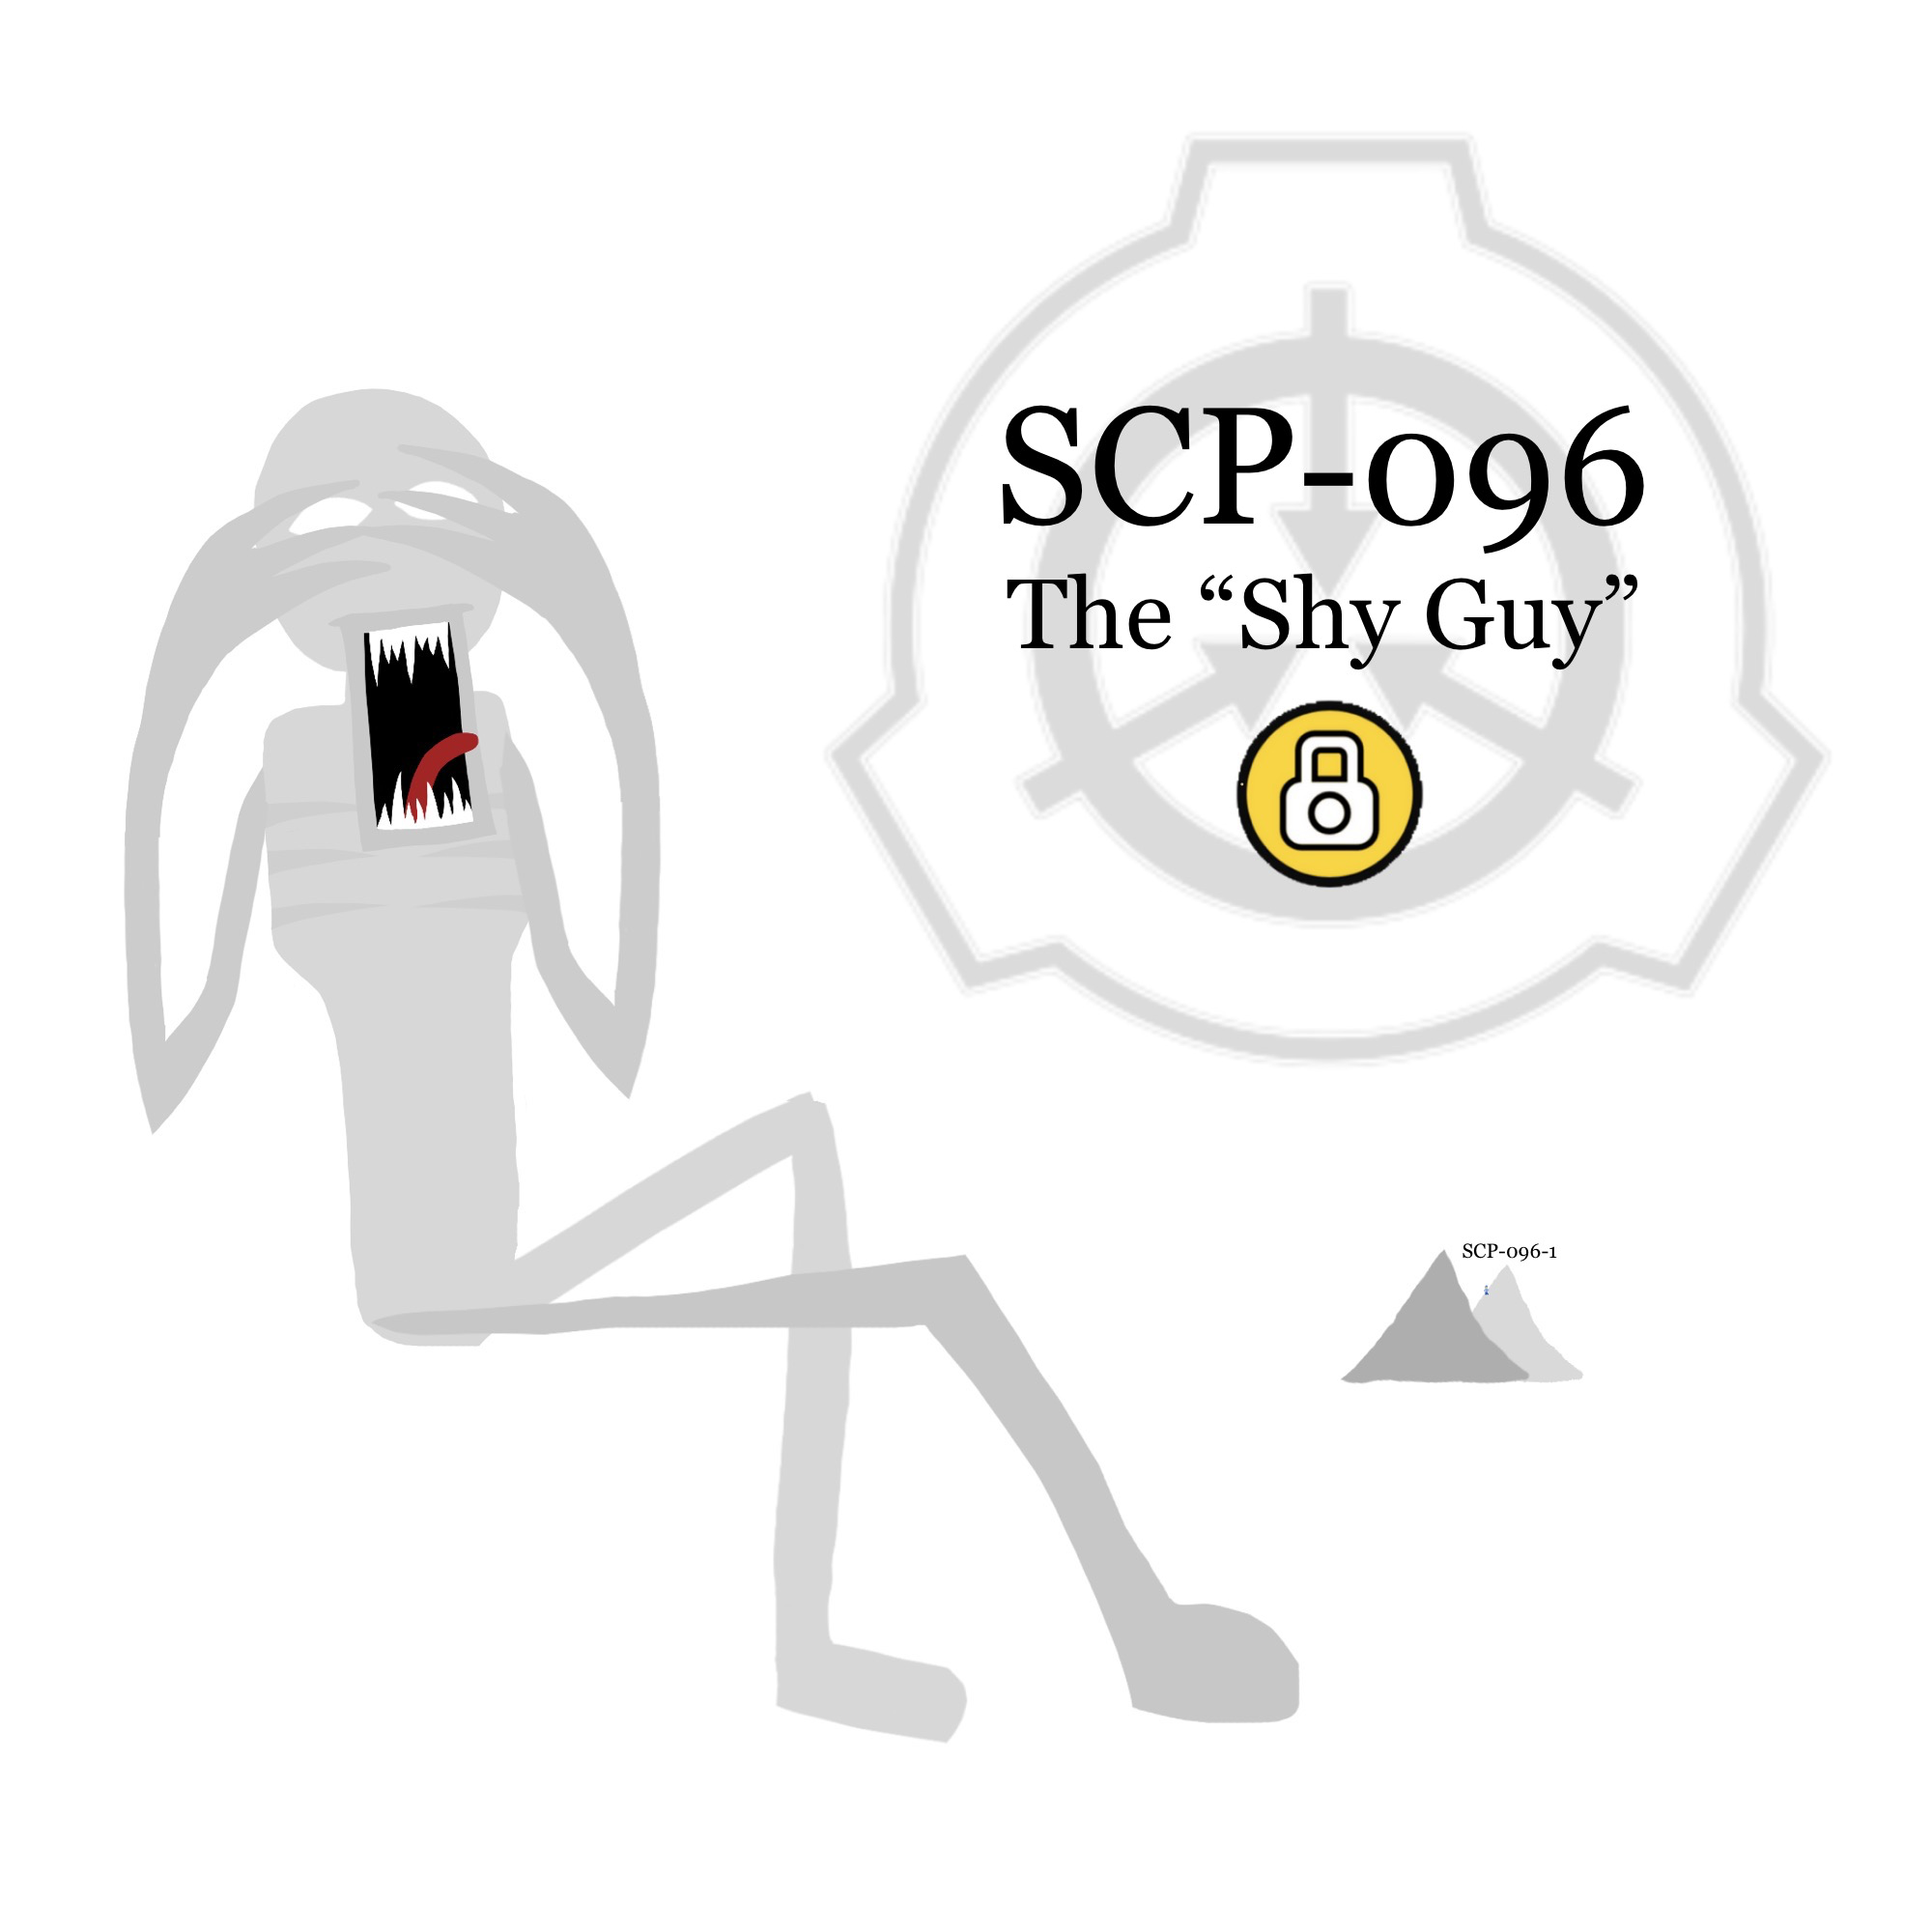 SCP 096 is a humanoid creature measuring approximately 2.38 meters in